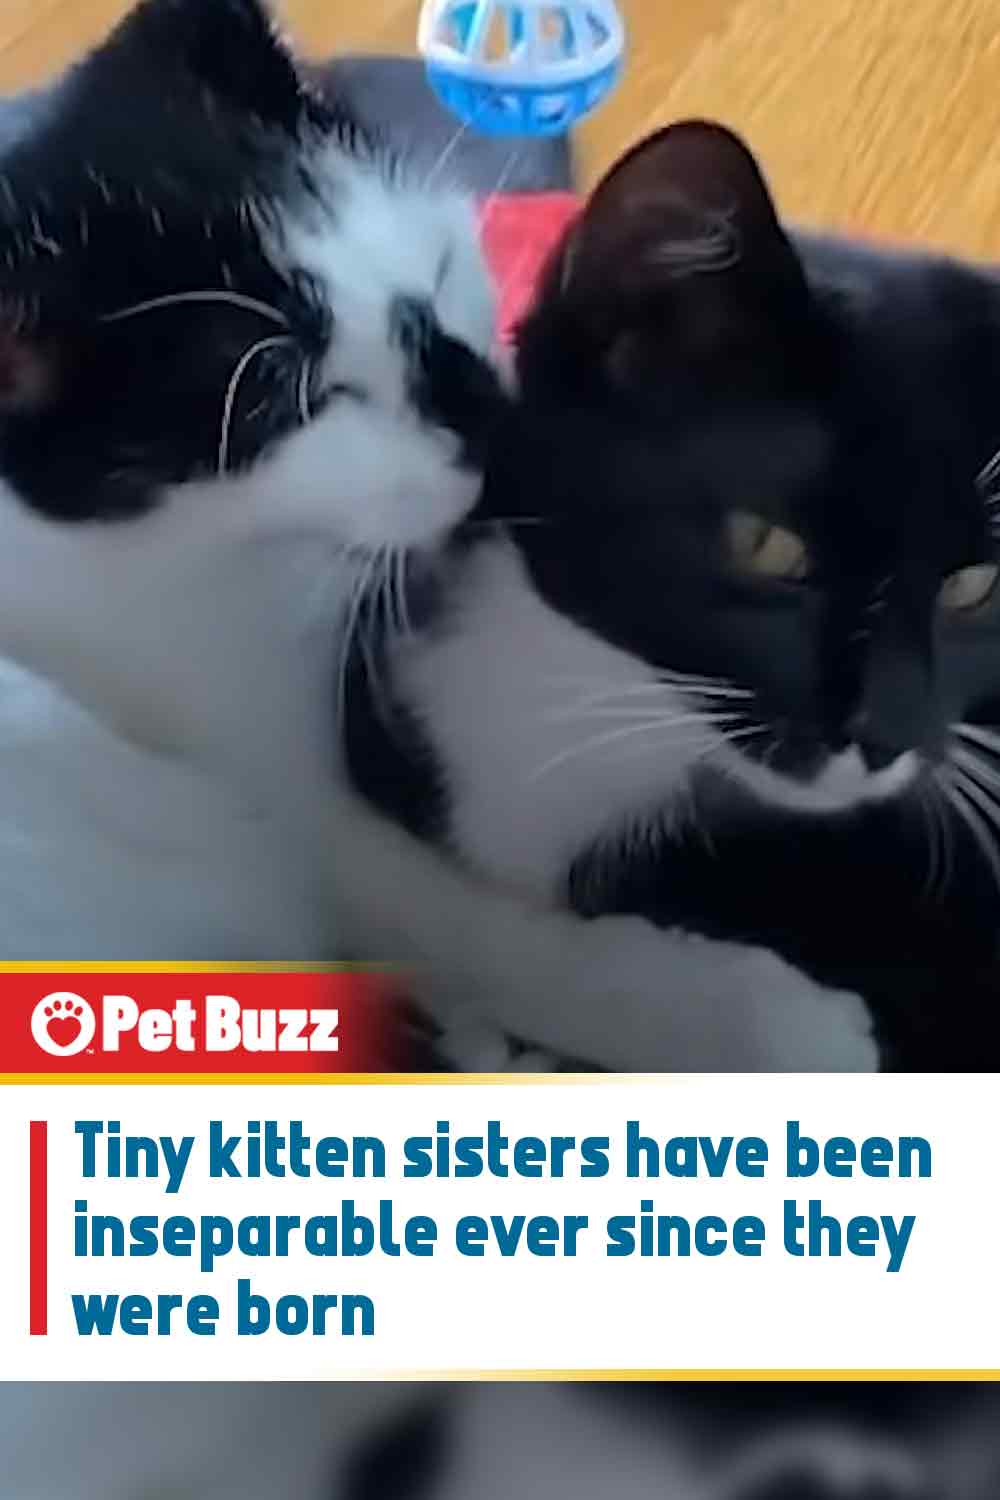 Tiny kitten sisters have been inseparable ever since they were born